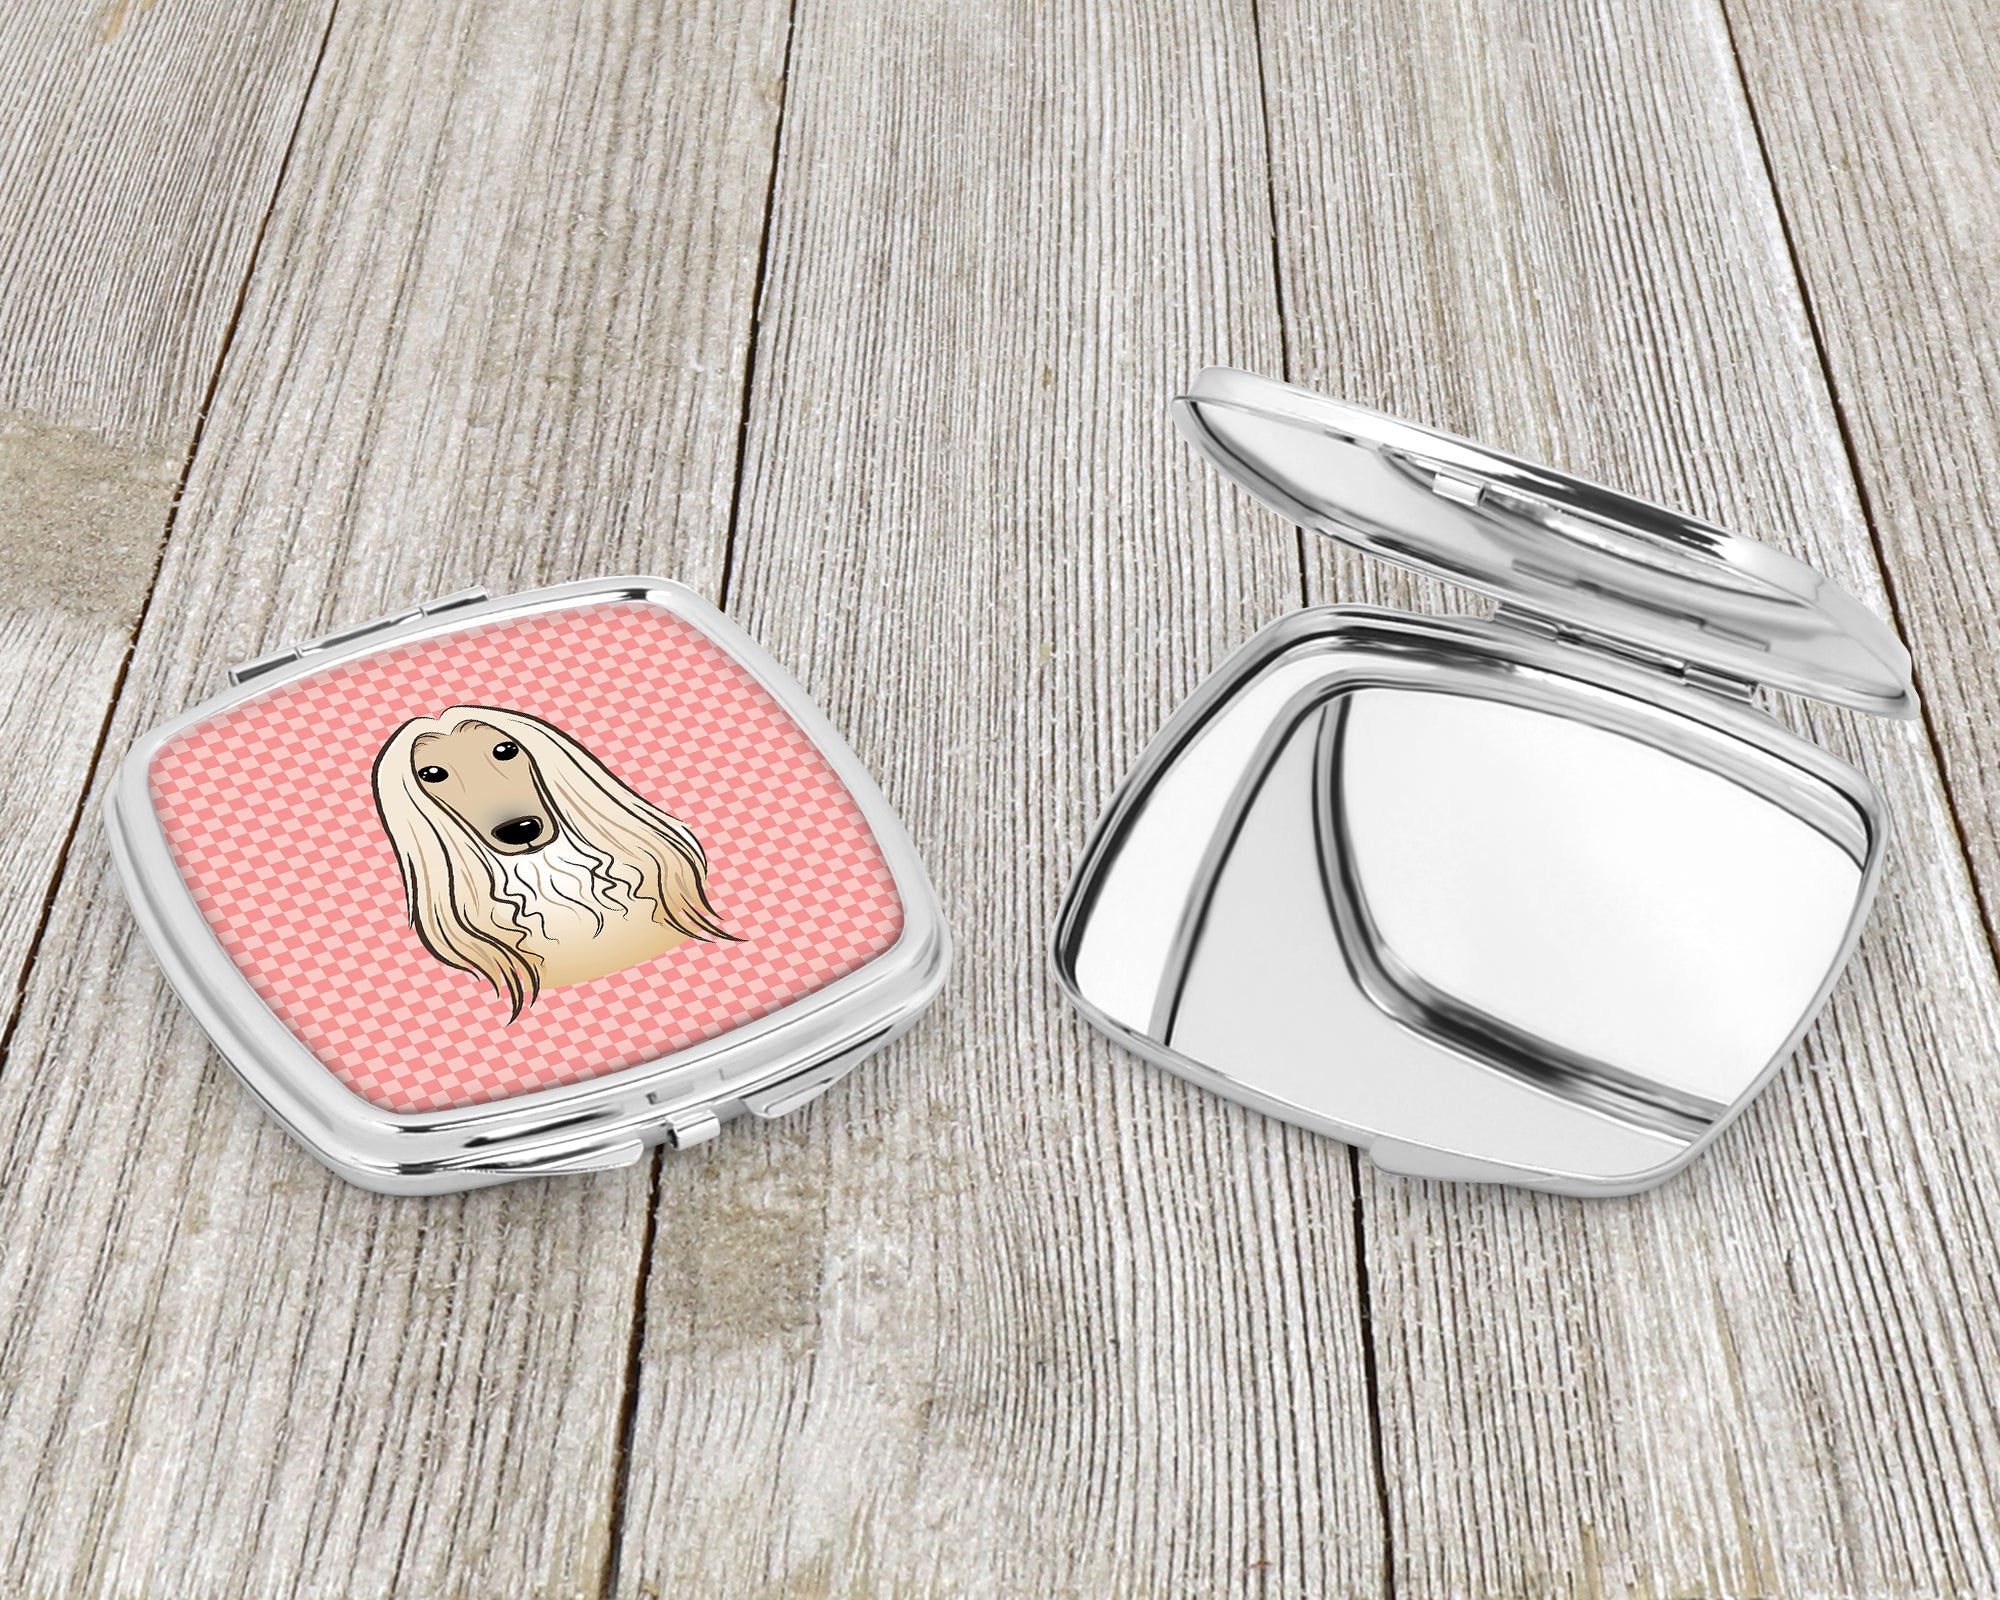 Checkerboard Pink Afghan Hound Compact Mirror BB1244SCM  the-store.com.